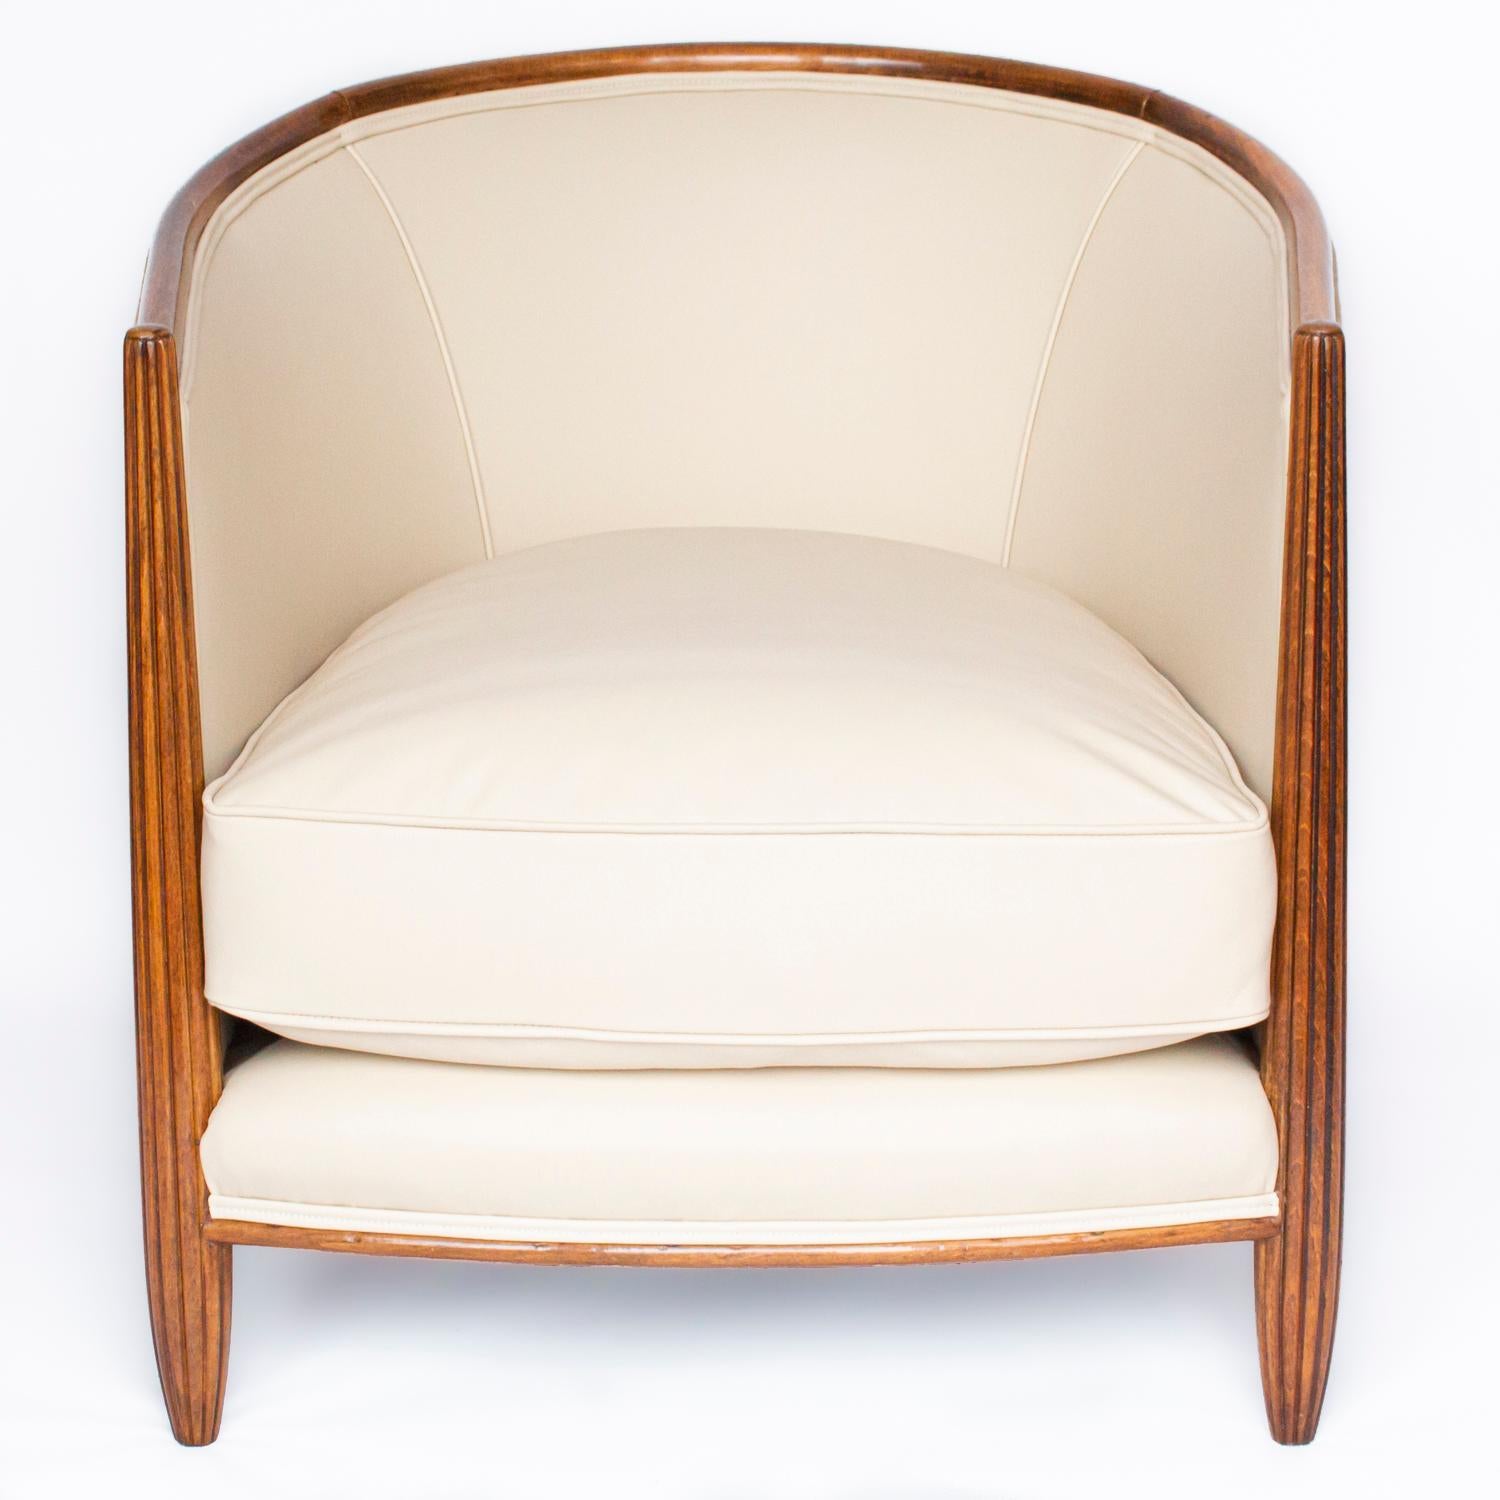 An Art Deco tub chair in beechwood. Reupholstered in cream suede and leather.

Dimensions: H 68cm, W 62cm, D 54cm, Seat H 34cm, Seat D 54cm

Origin: French

Date: circa 1930

Item No: 1103201

All of our furniture is extensively polished